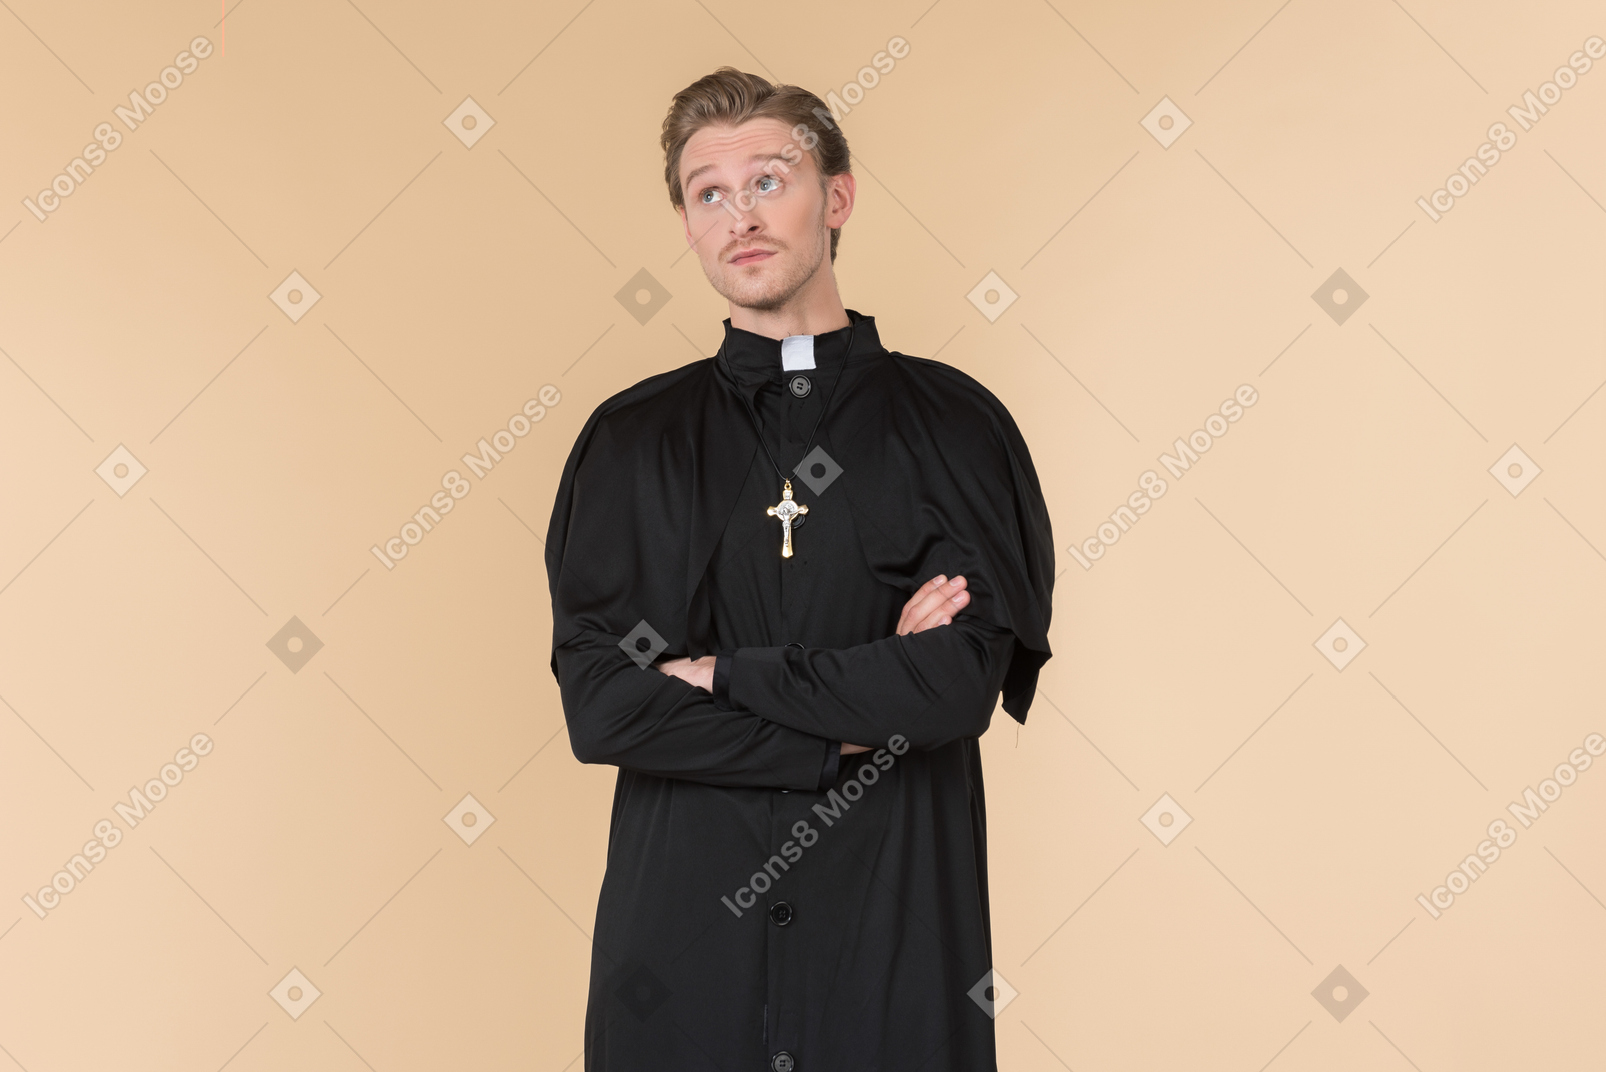 Pensive catholic priest standing with hands folded